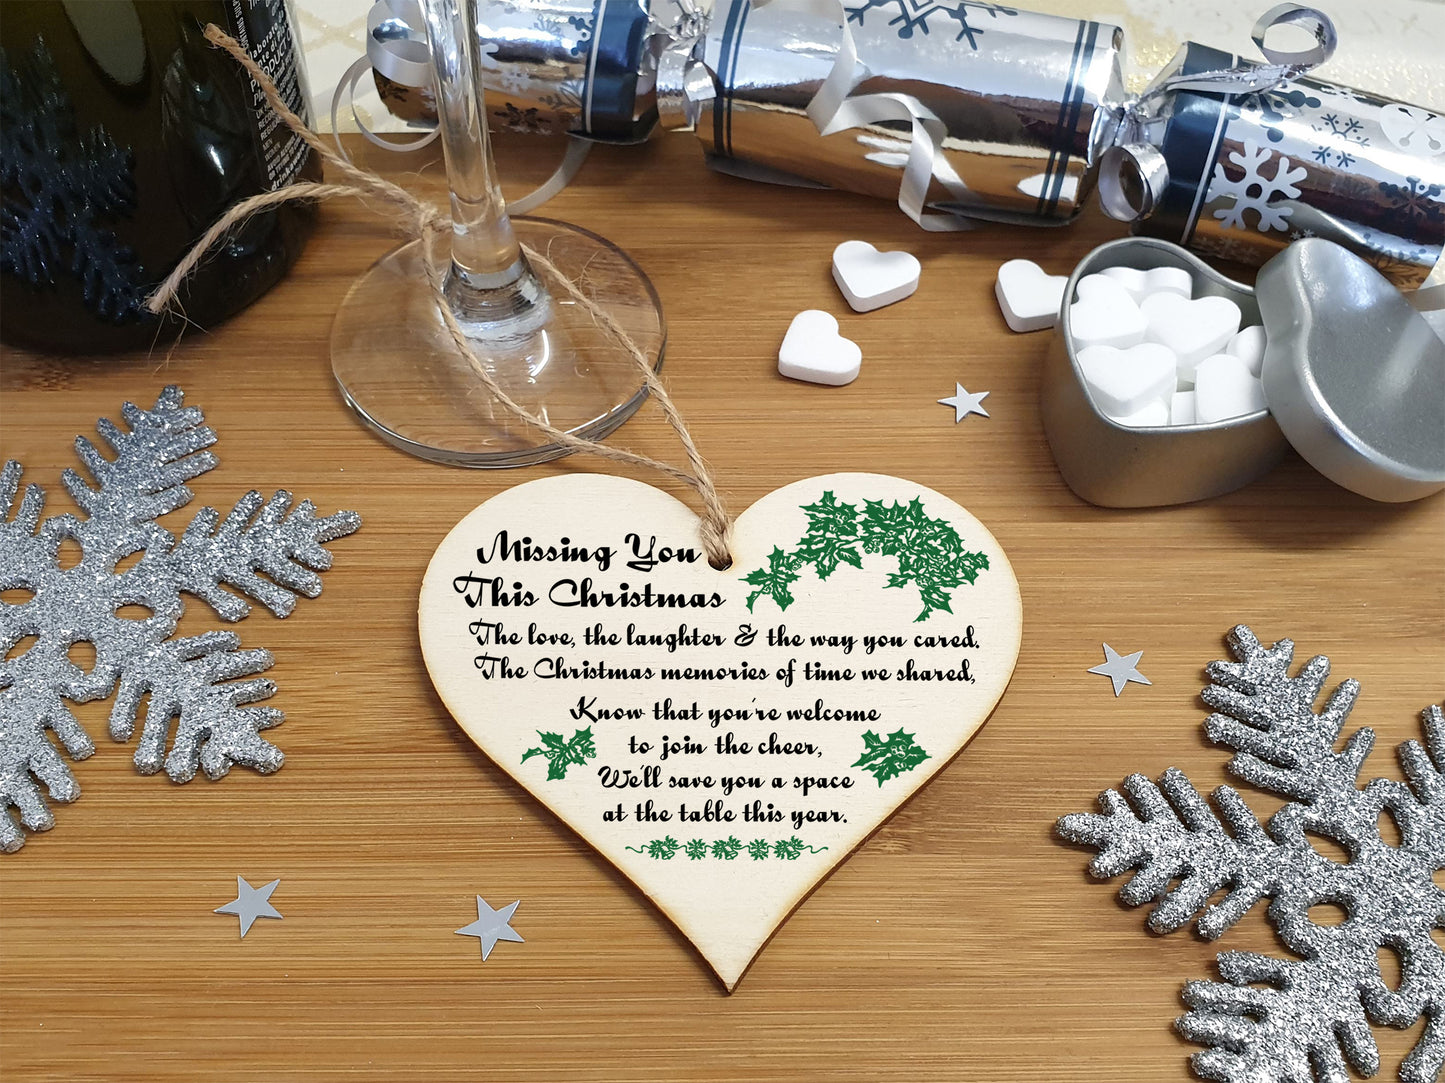 Handmade Wooden Hanging Heart Plaque Gift to Remember Lost Loved Ones at Christmas